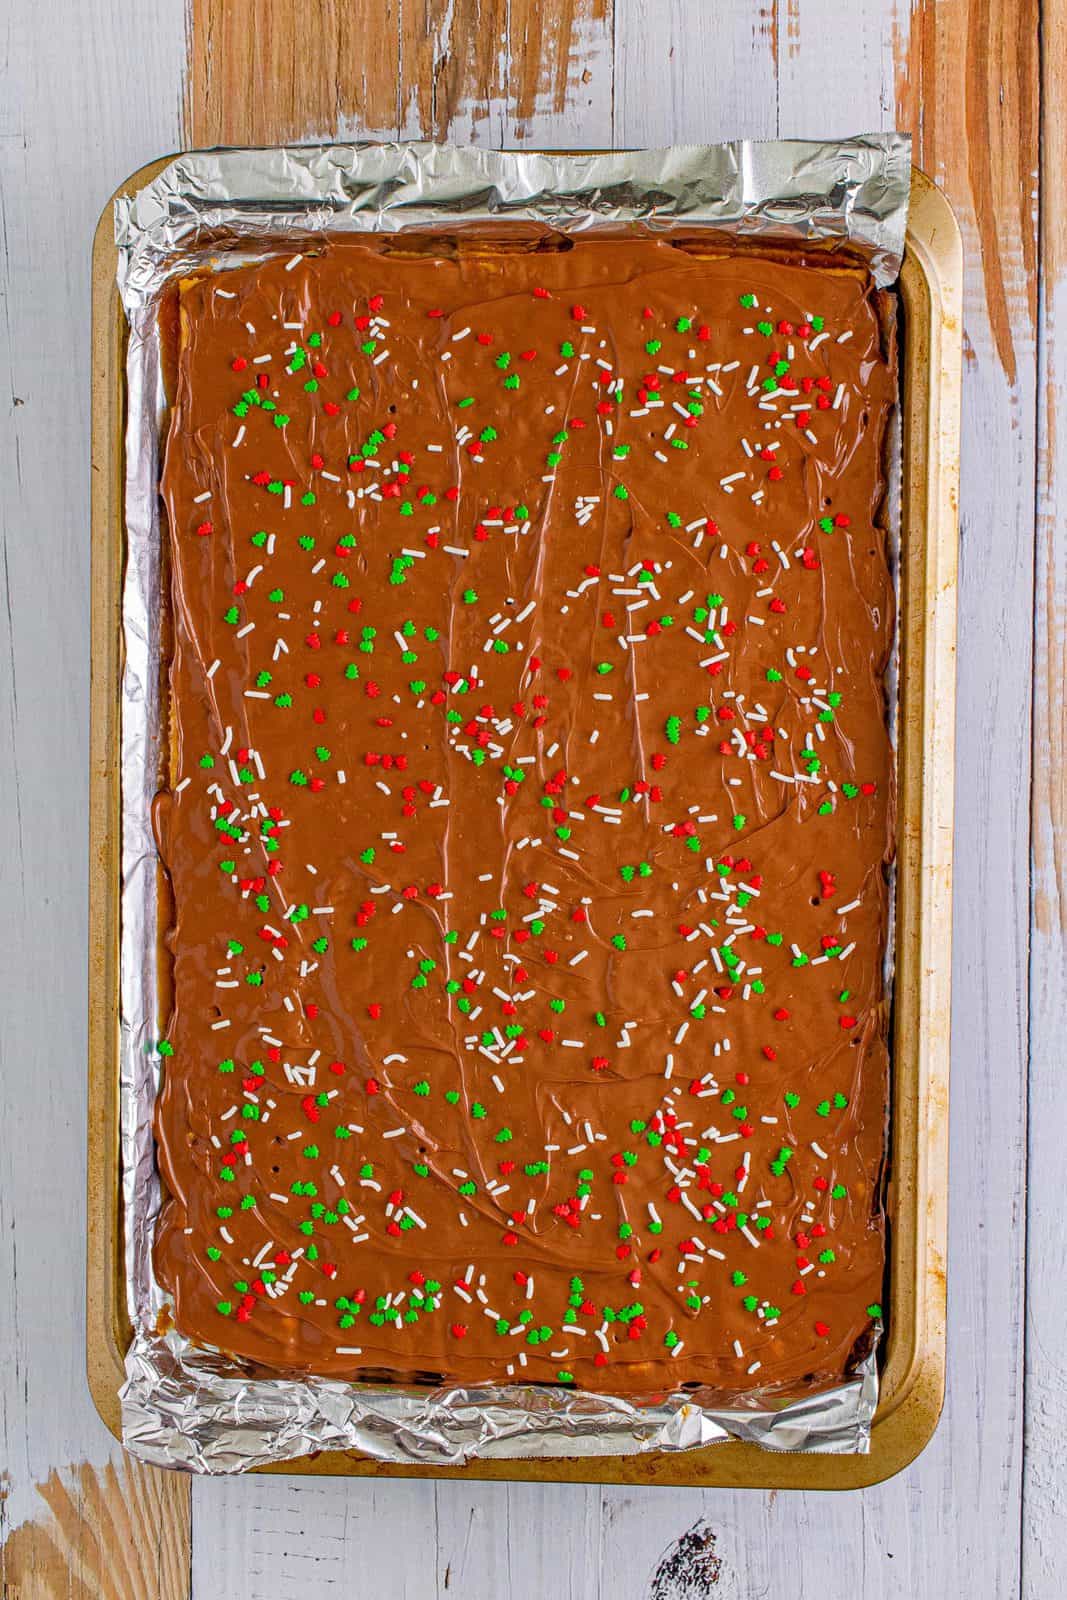 melted chocolate evenly spread on top of crackers and topped with Christmas colored sprinkles.